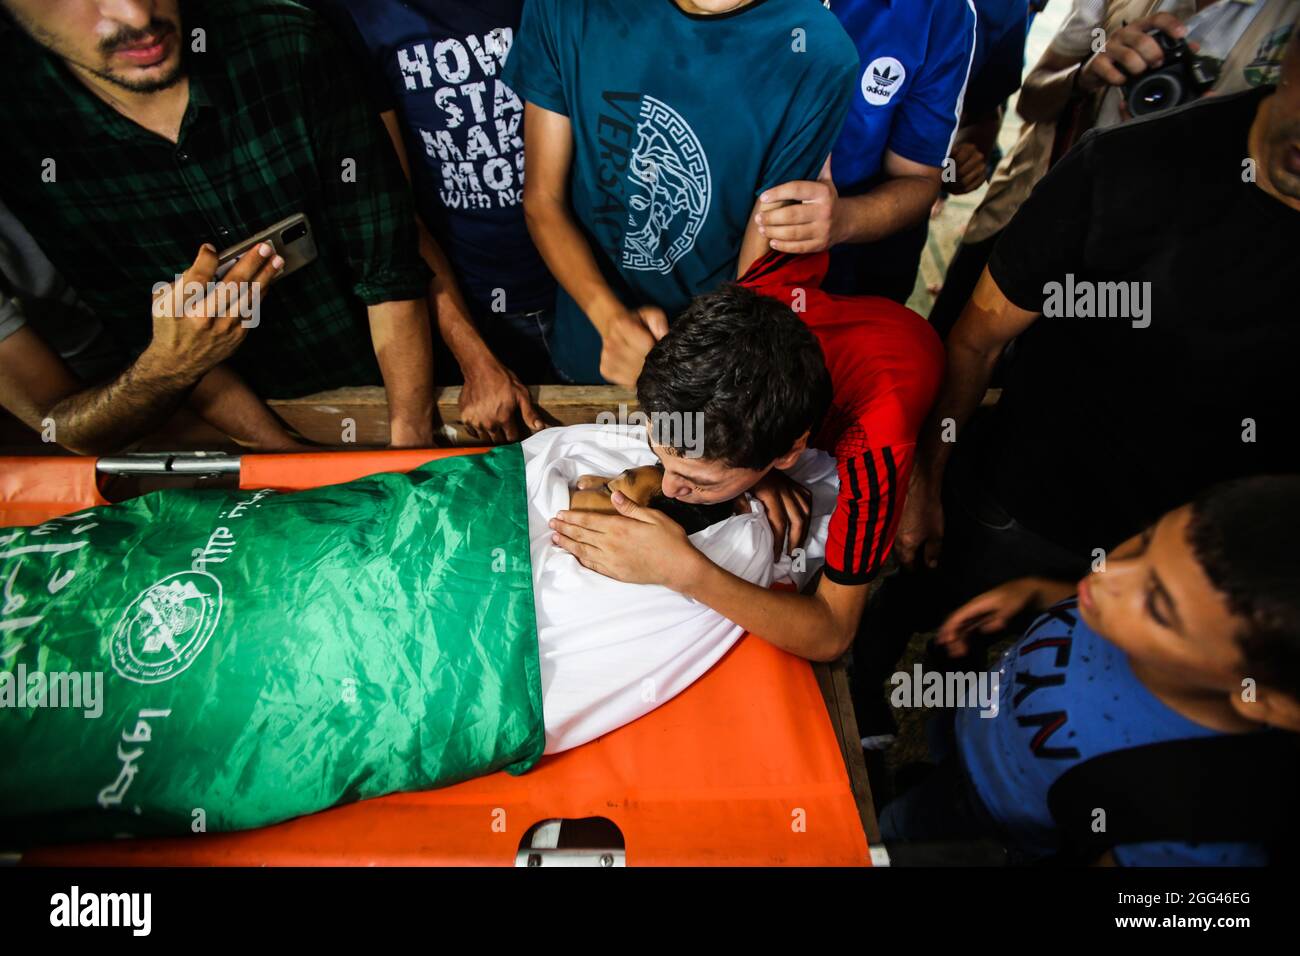 EDITORS NOTE: Image depicts death)Relatives of a Palestinian teen Omar Abu  Neal mourn near his body during the funeral. Palestinian teenager was  injured on August 21 during the demonstration arranged by the